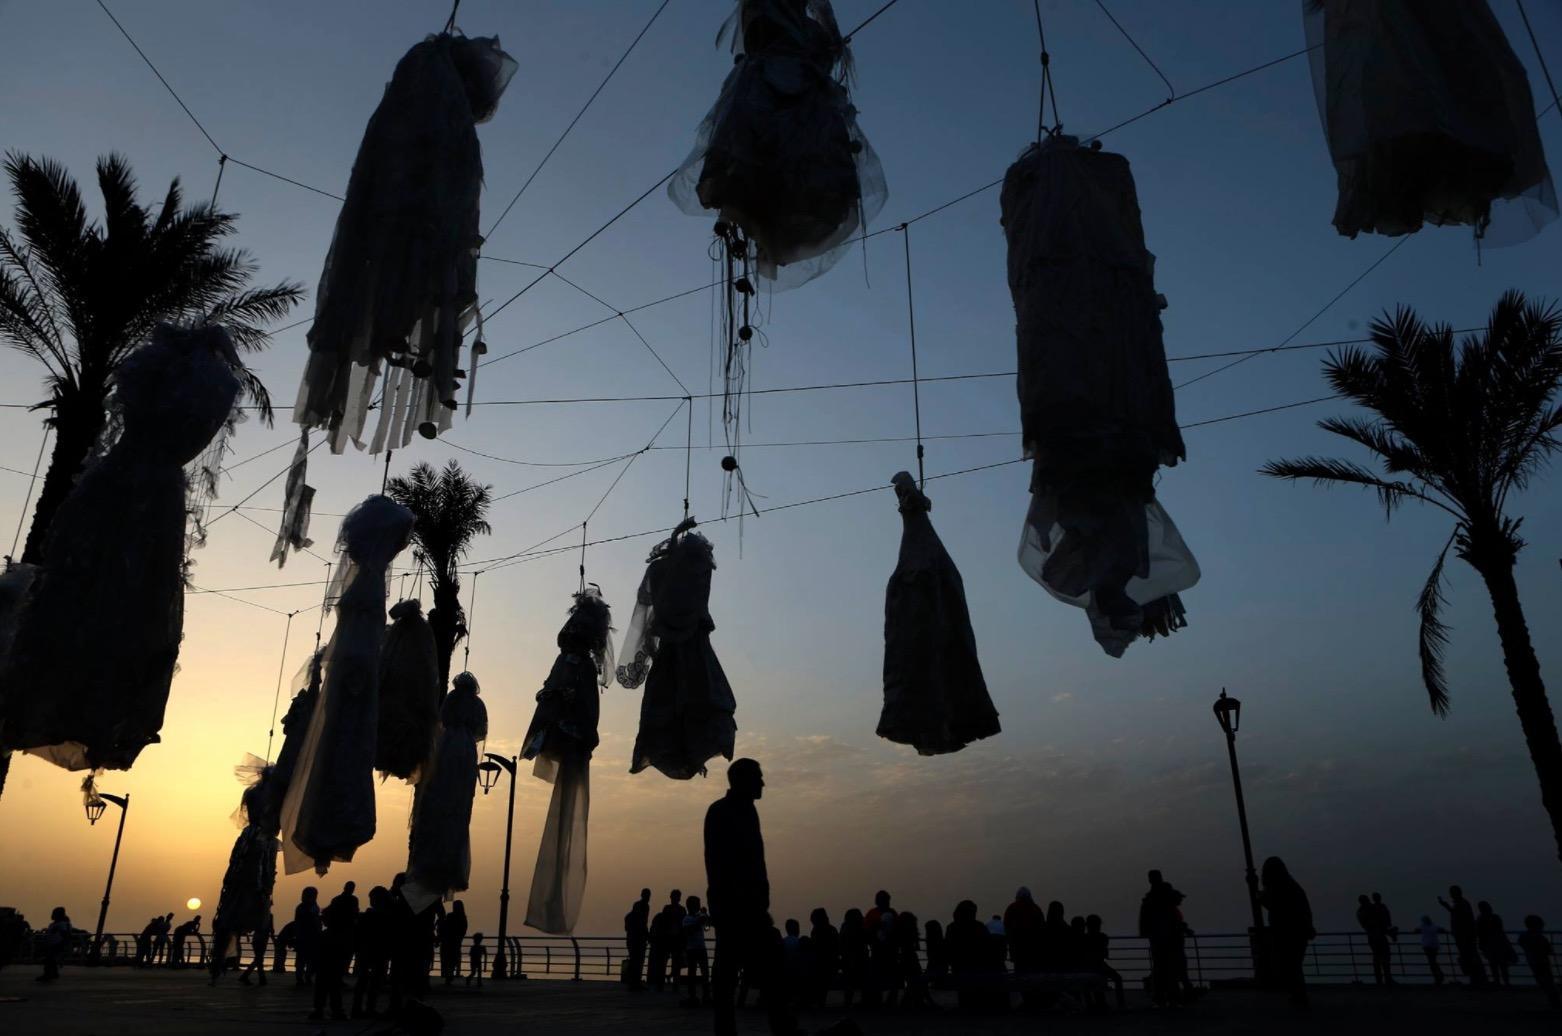 Thirty-one dresses were strung up on the Lebanese capital’s famous seafront to draw attention to Article 522 of the law addressing rape, assault and forced marriage